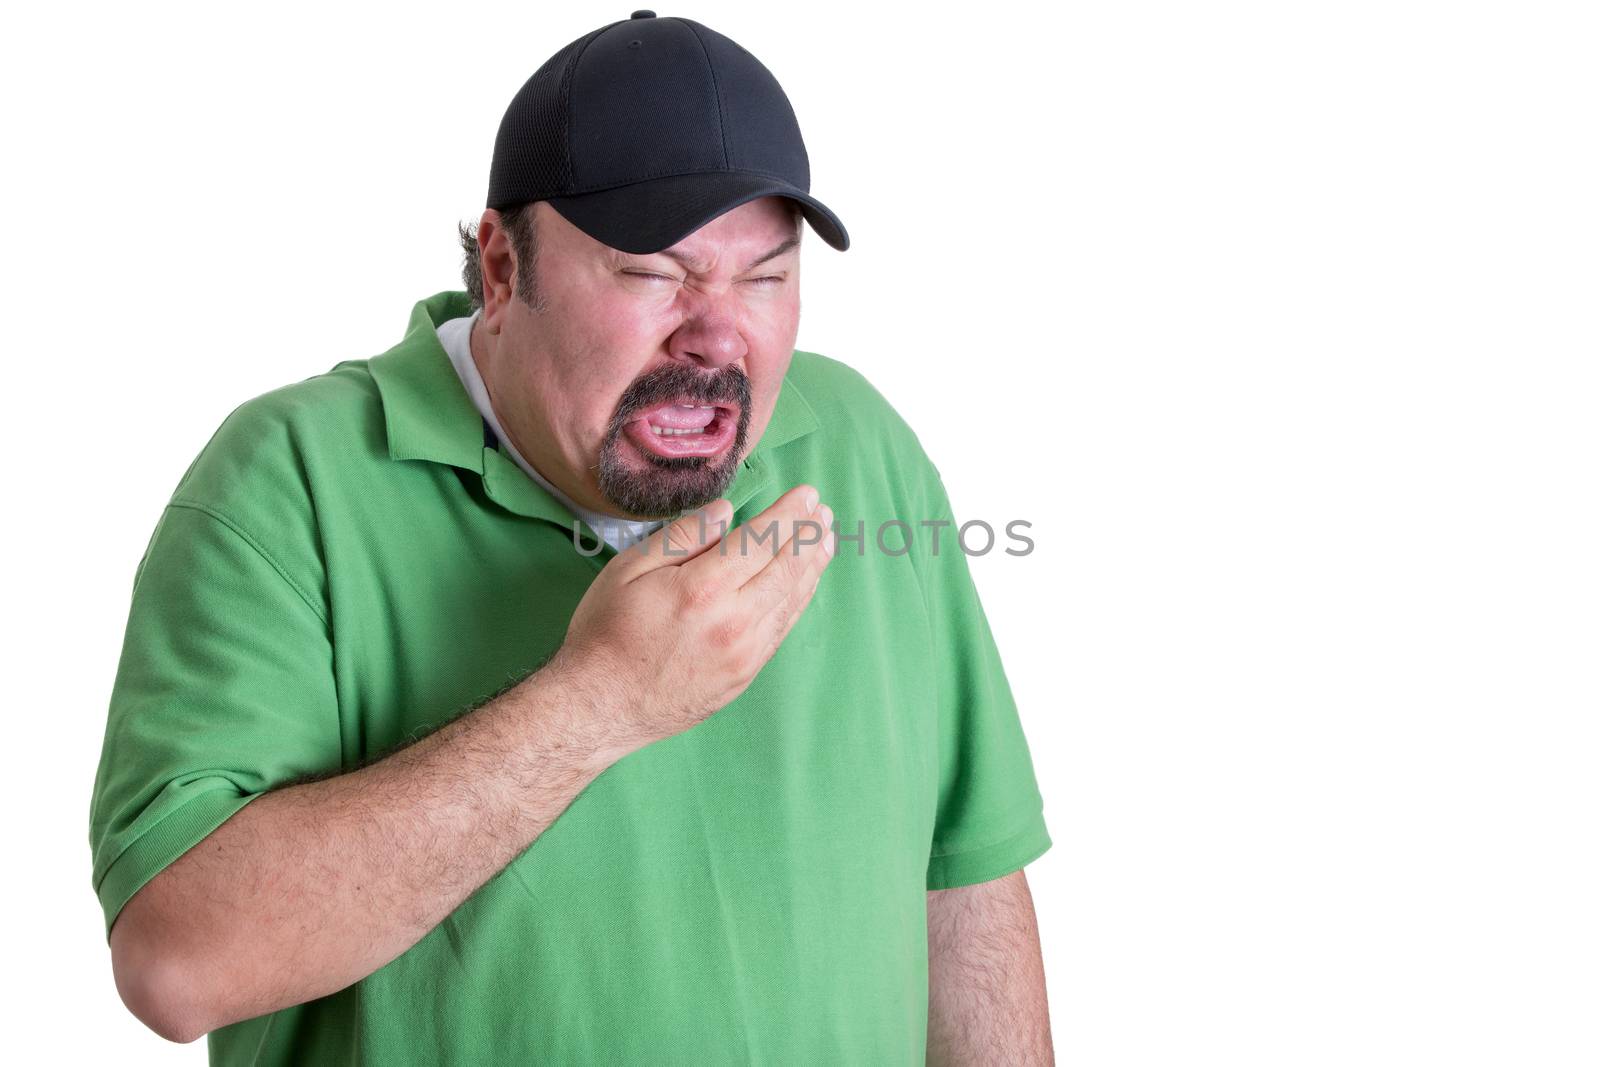 Upper Body Image of Overweight Man Wearing Green Shirt and Black Baseball Cap Covering Mouth While Sneezing in front of White Background